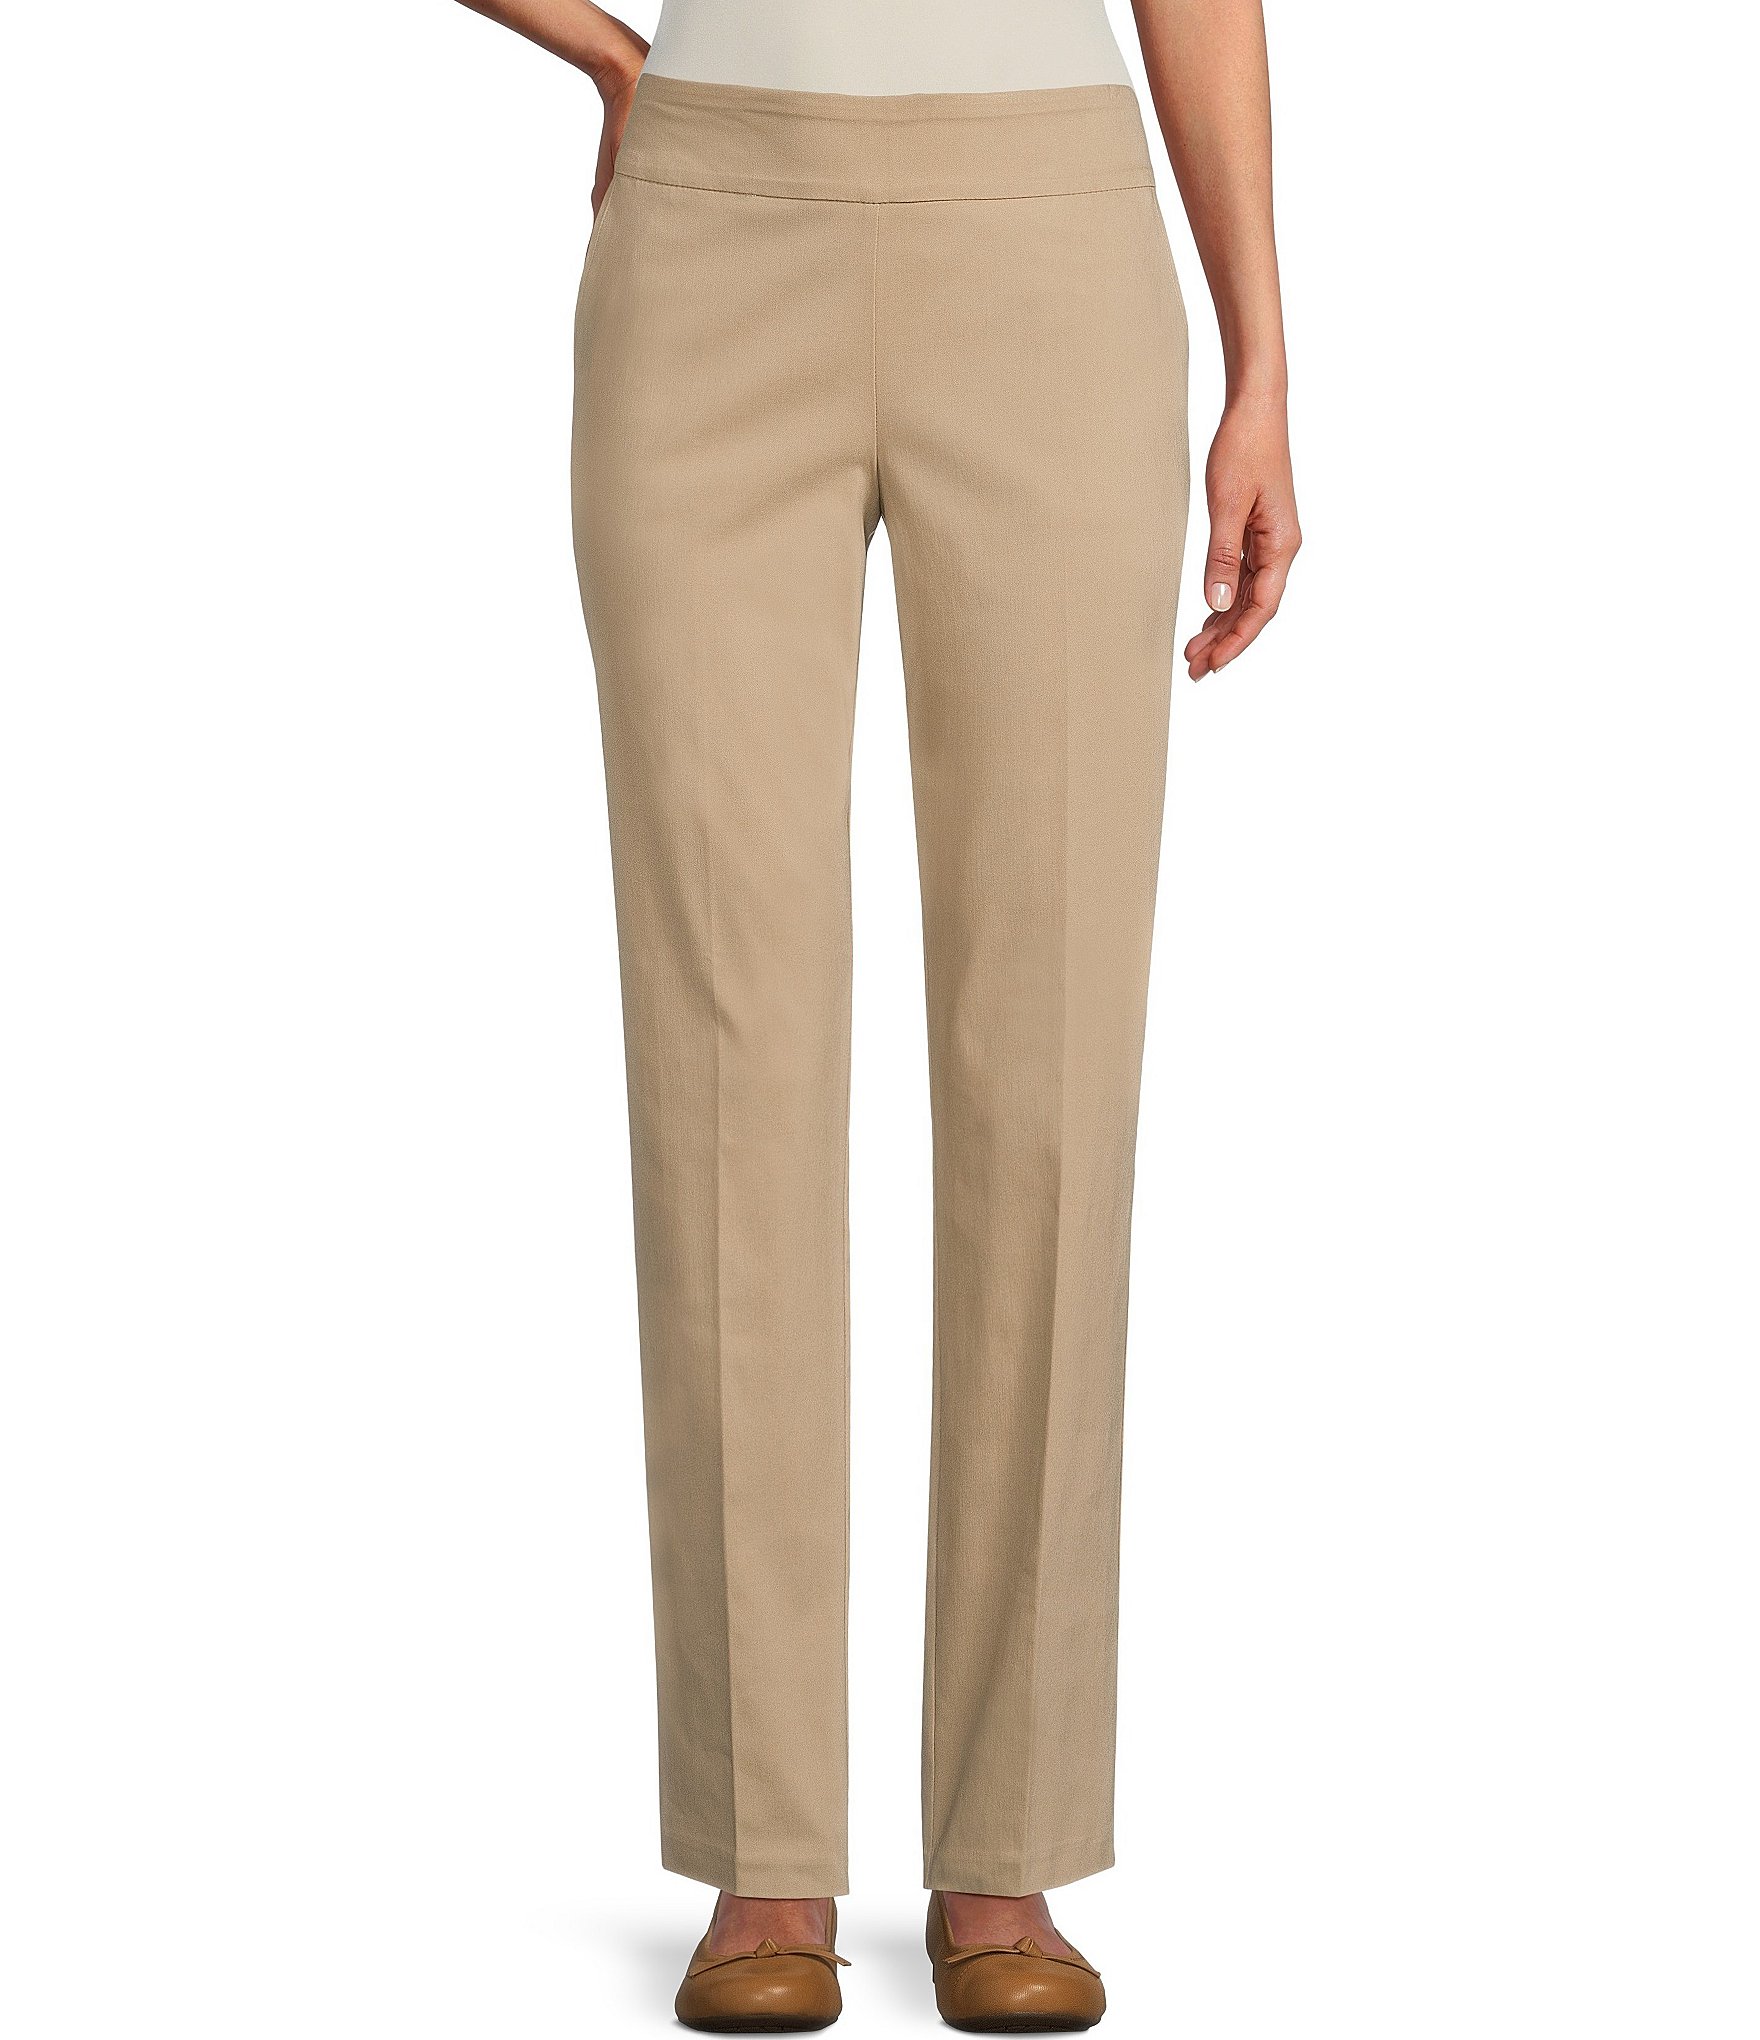 Intro Petite Size The Audrey Stretch Woven Elastic Waist Pull-On